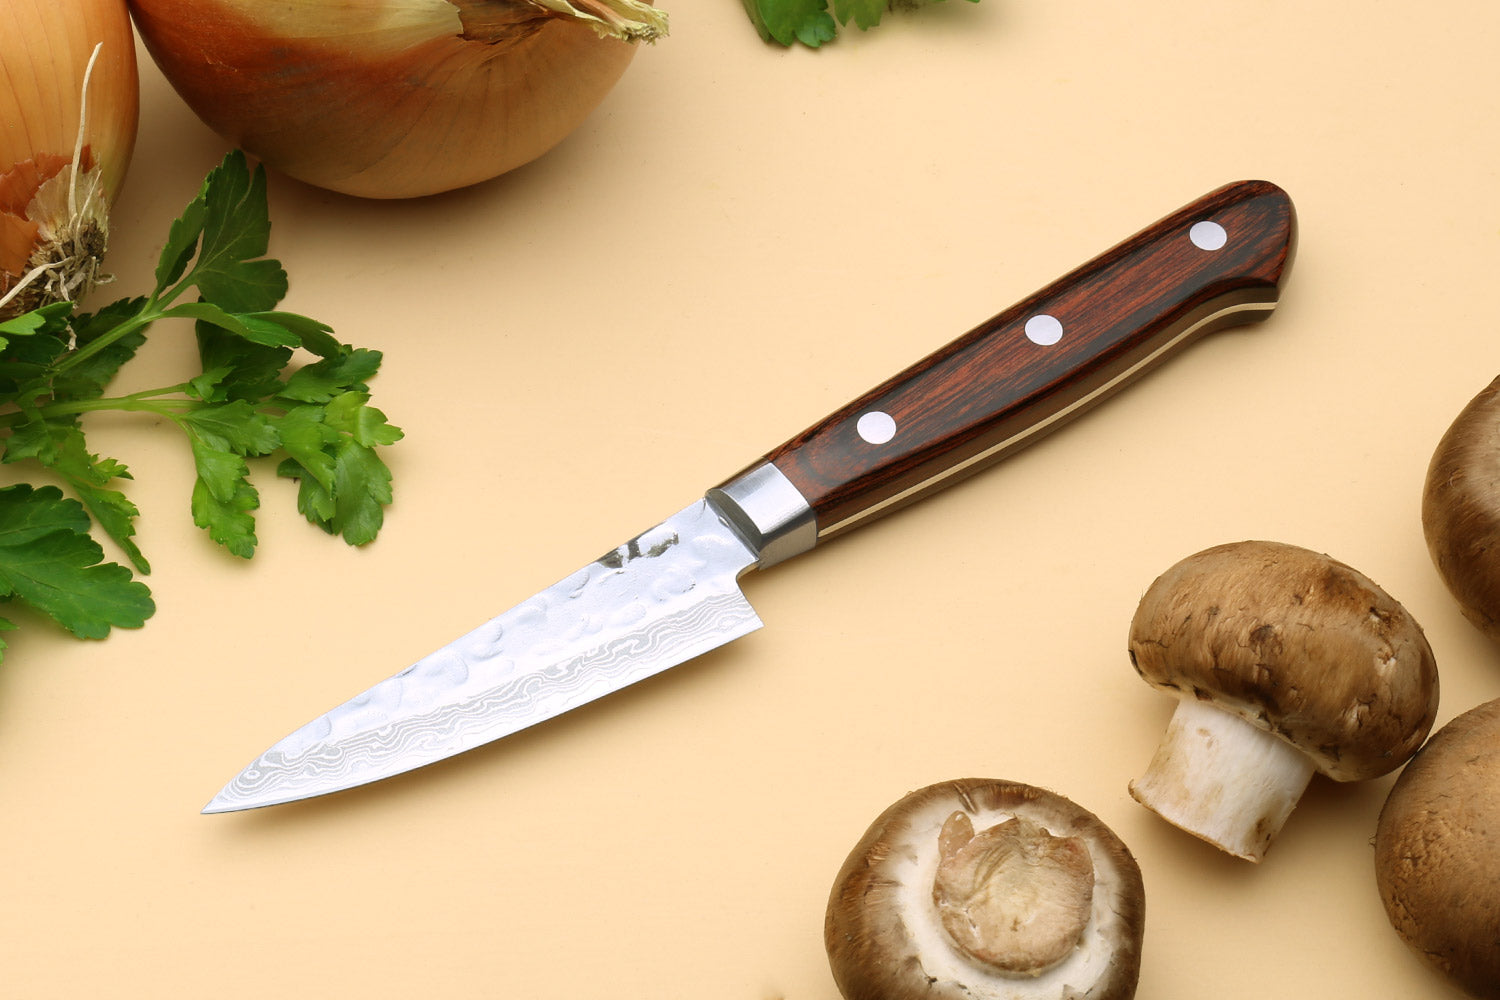 Paring Knife w/ Sharp & Durable Stainless Steel Blade